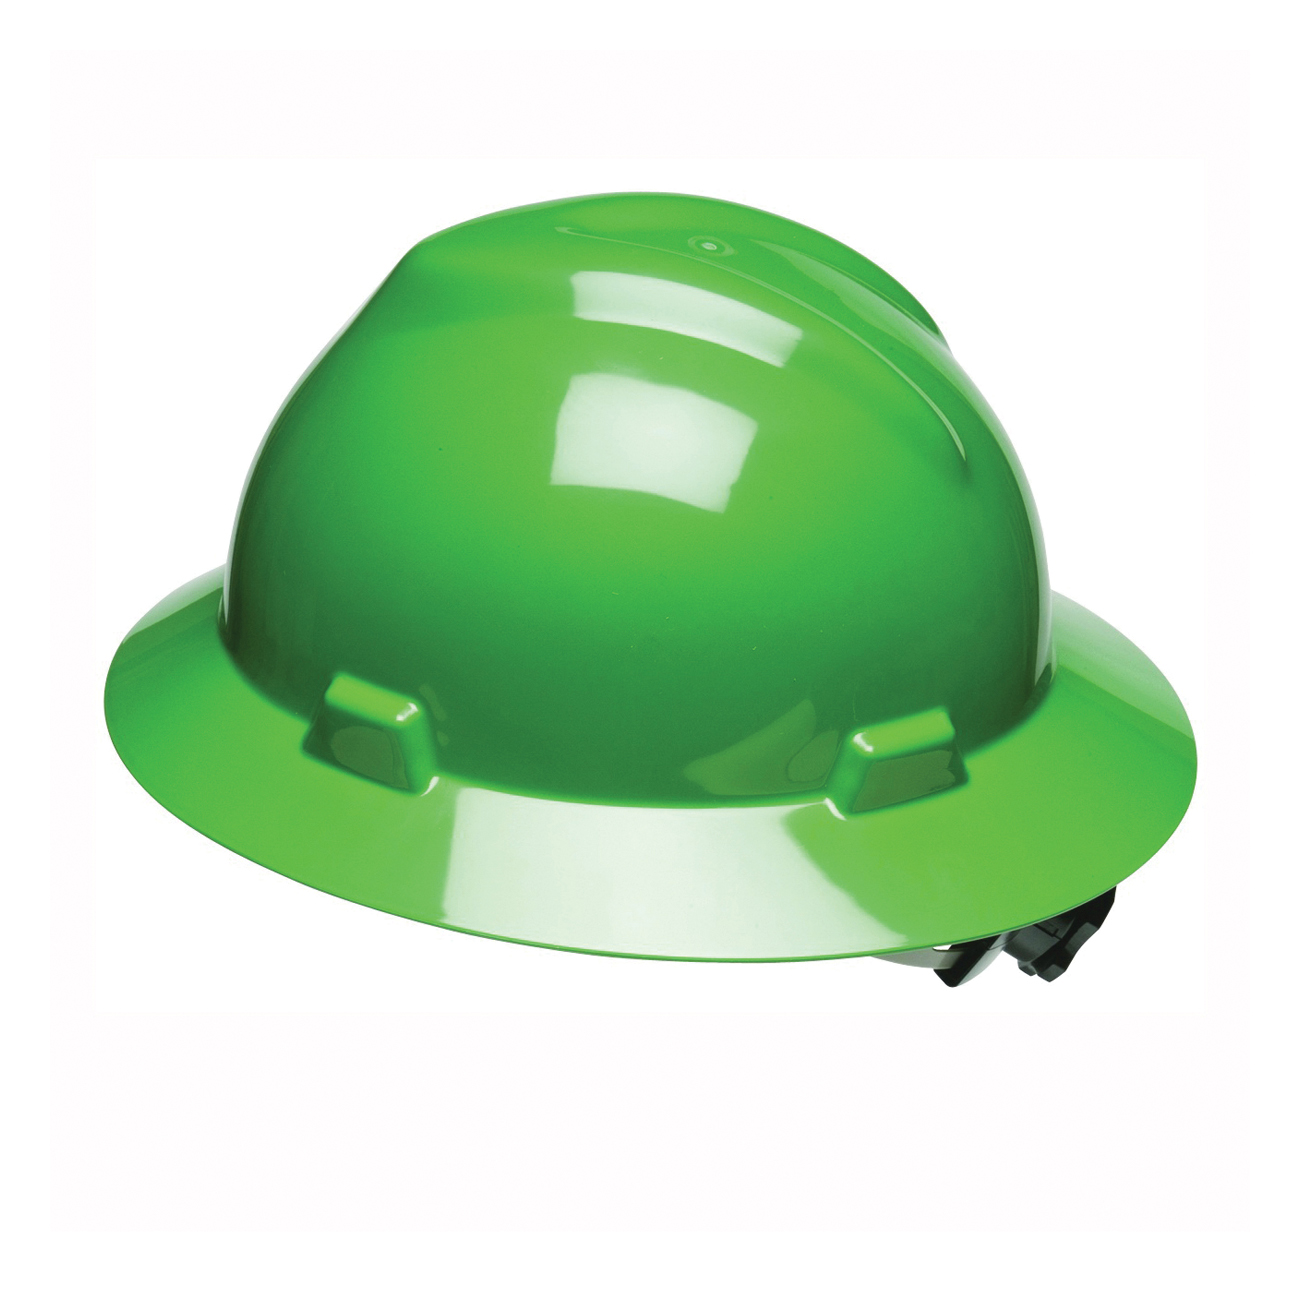 SWX00426 Hard Hat, 4-Point Textile Suspension, HDPE Shell, Green, Class: E